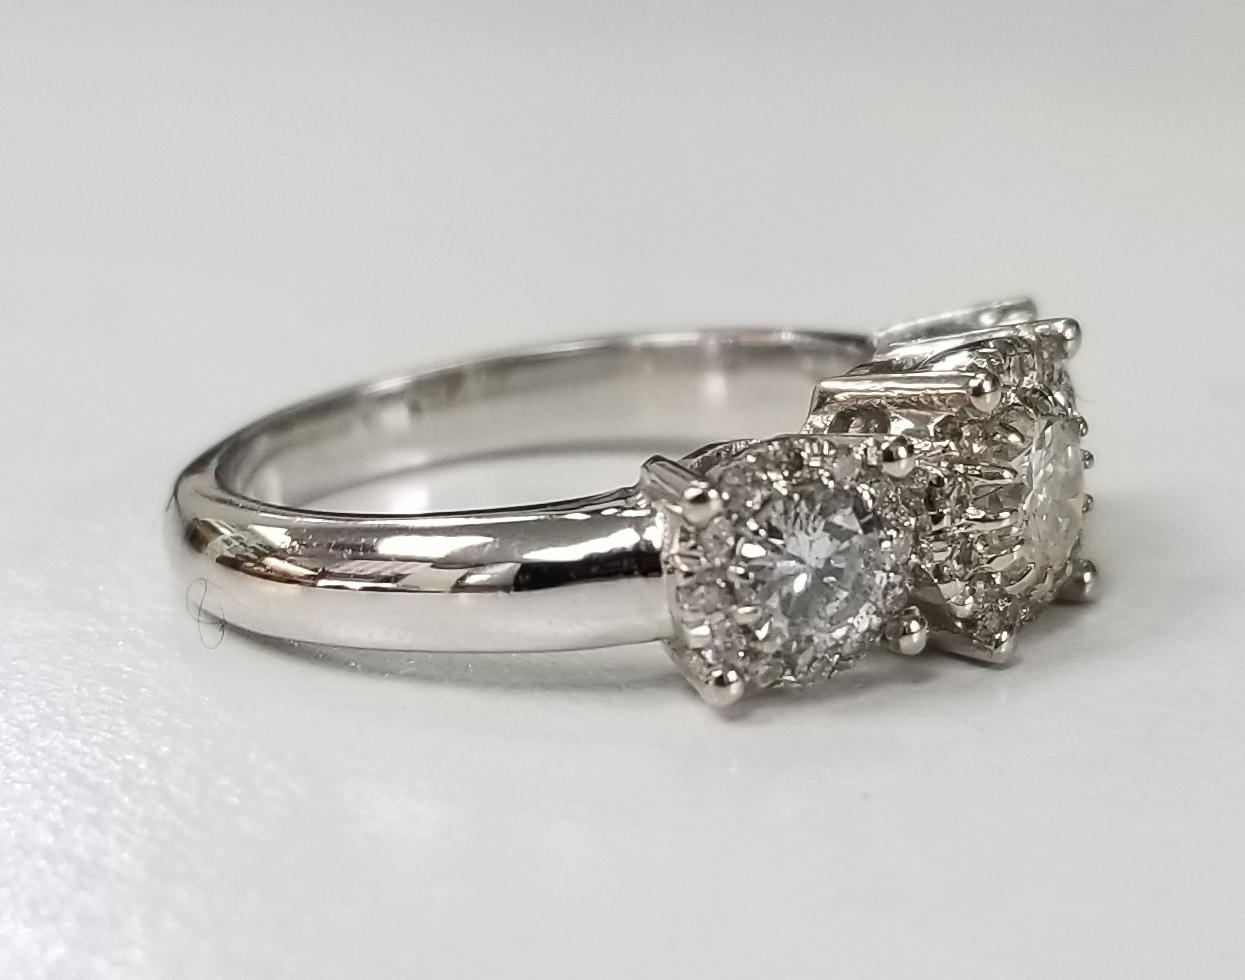 3 stone 14 karat diamond halo ring, containing 3 brilliant cut diamonds of fine quality weighing .76pts. and 38 round full cut diamonds of very fine quality weighing .38pts. This ring is a size 6 but we will size to fit for free.